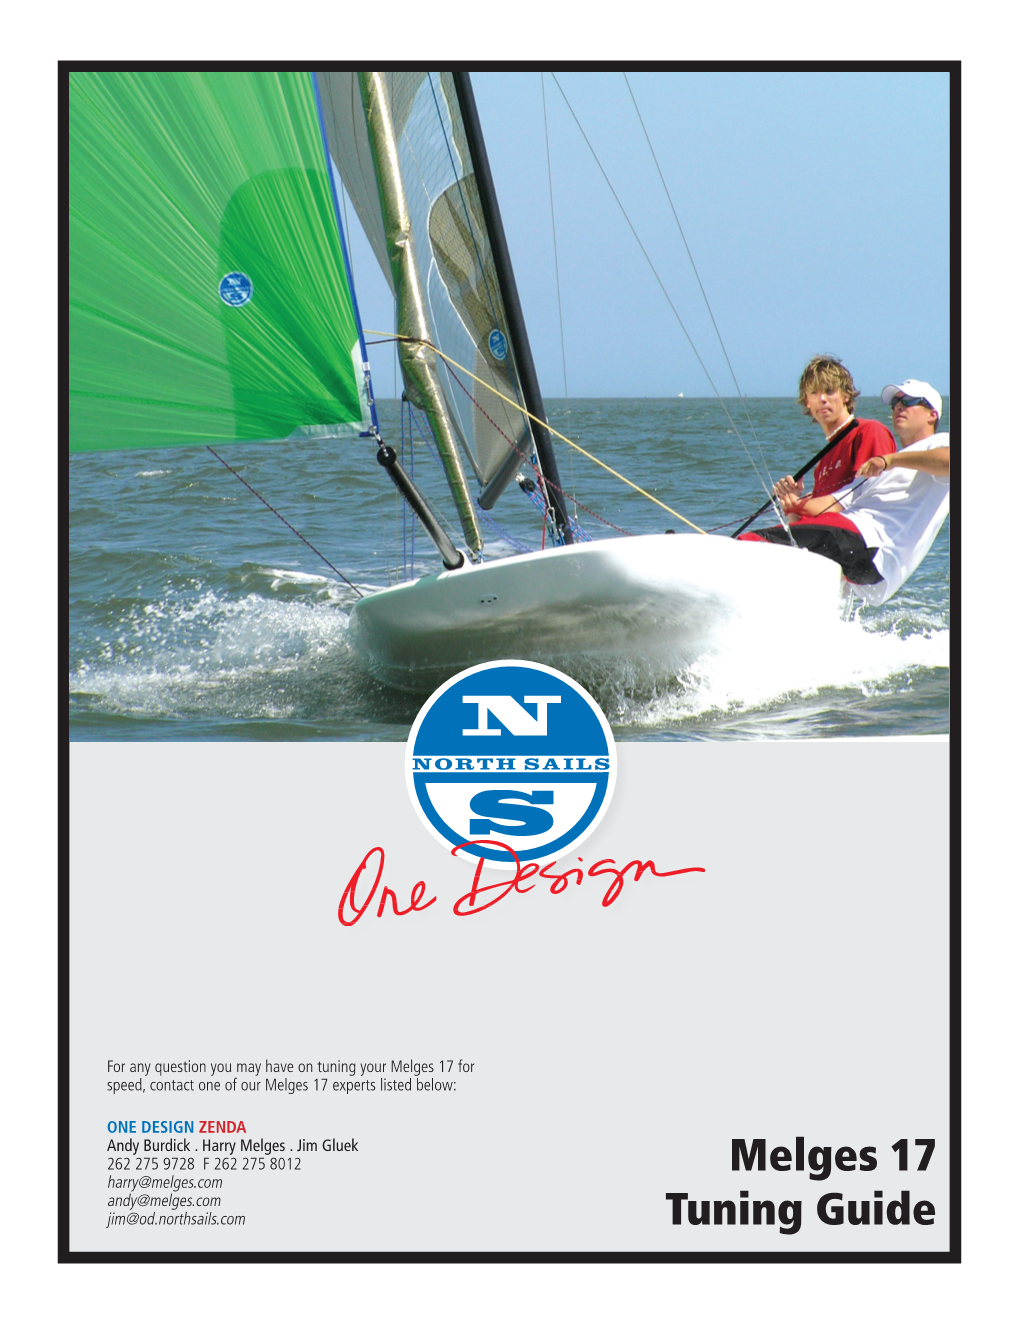 Melges 17 Tuning Guide